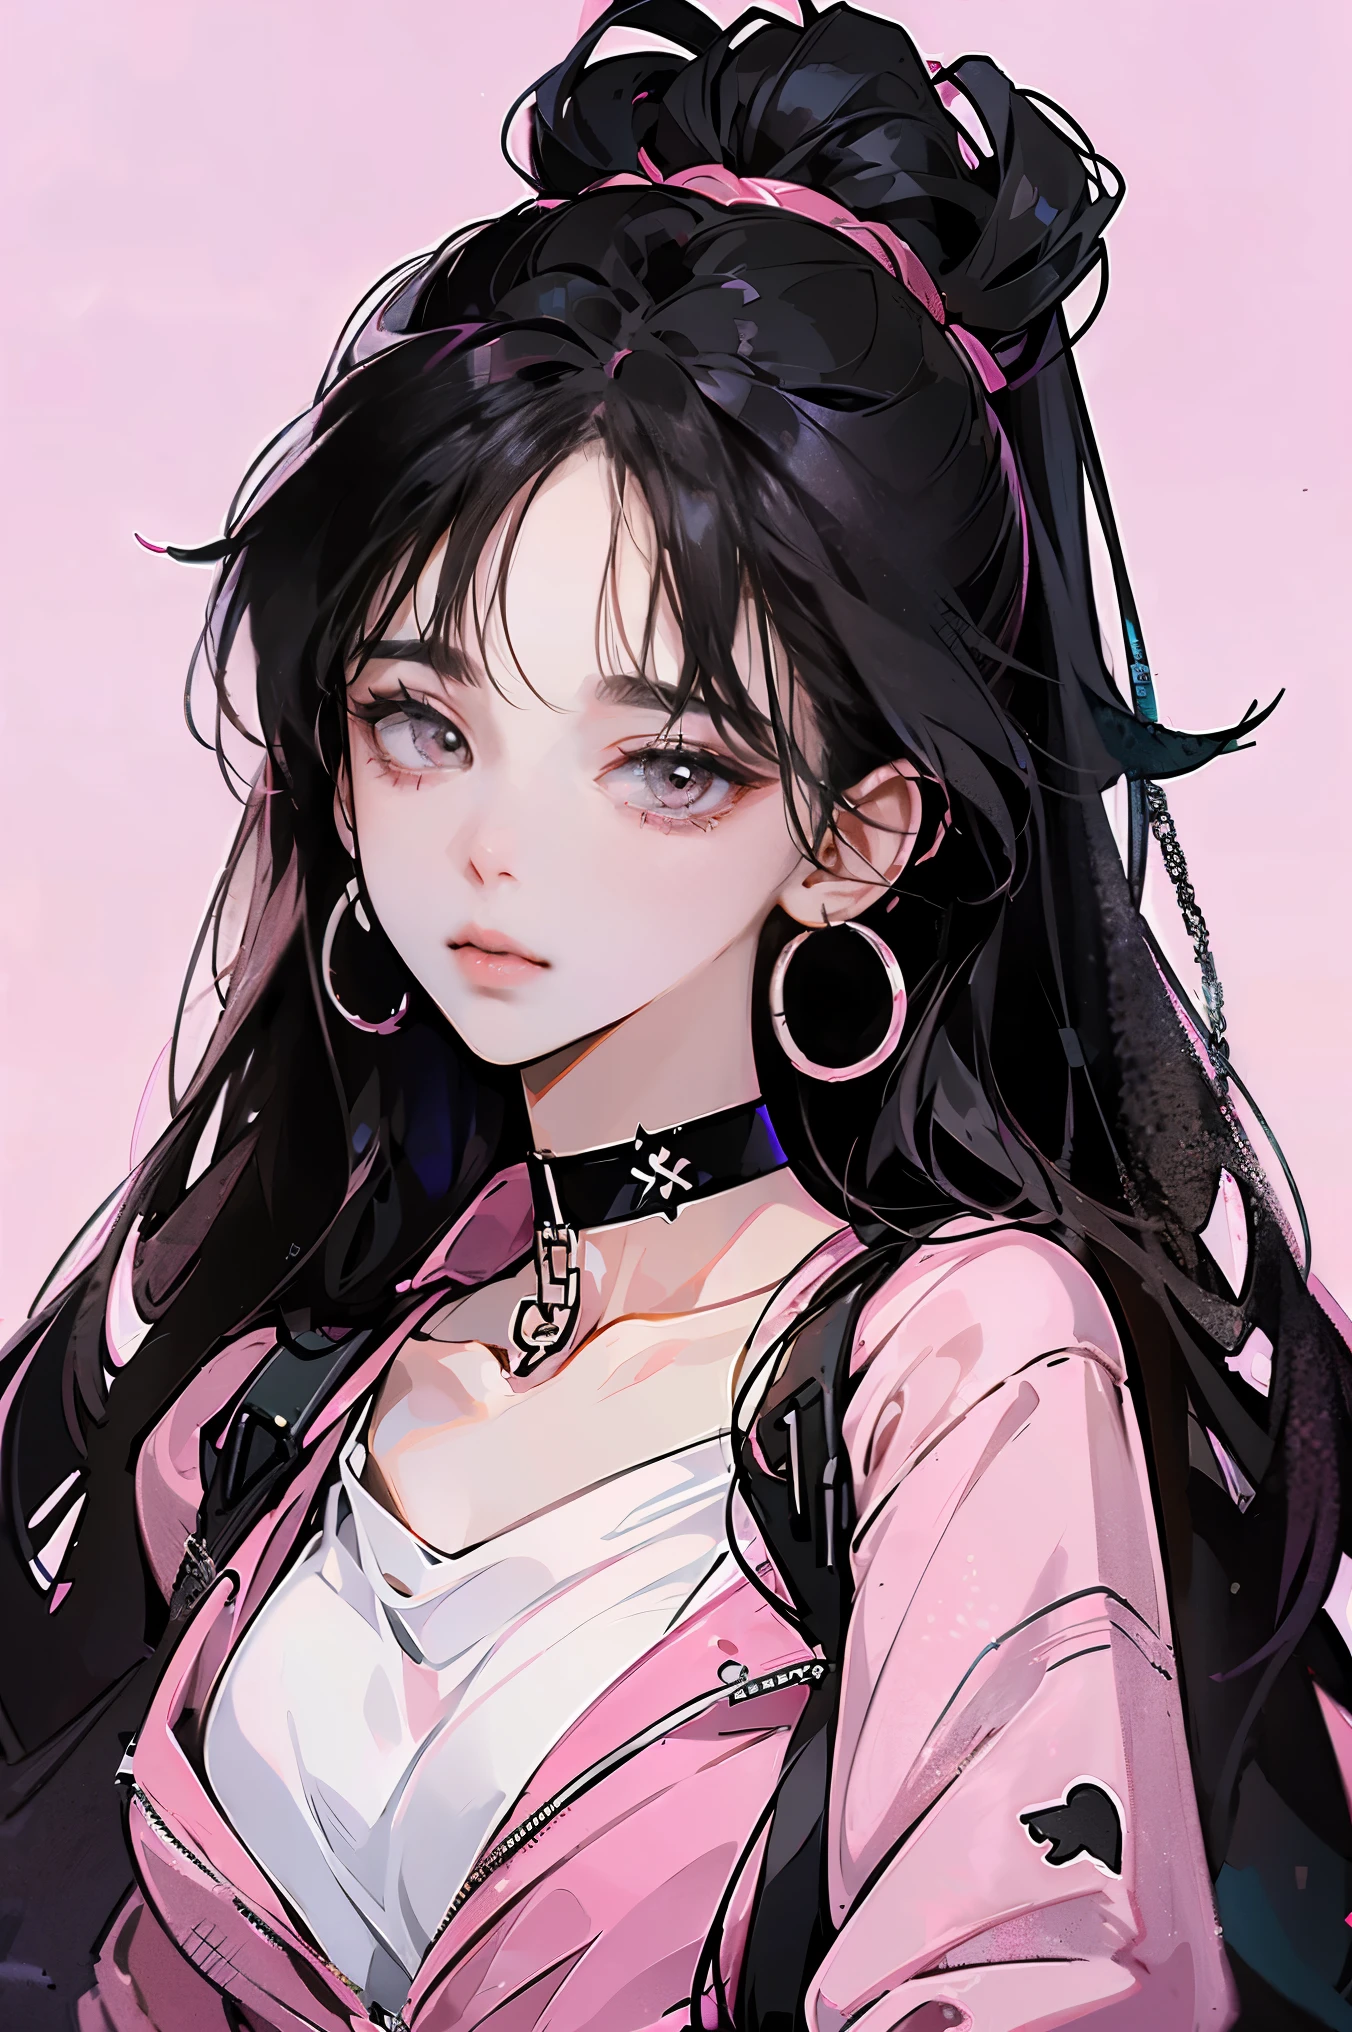 (Extremely detailed), drawing of a woman with a black choker connected to a chain, pink clothing, black hair, many piercings, in an anime style, anime style portrait, cartoon art style, thick lineart